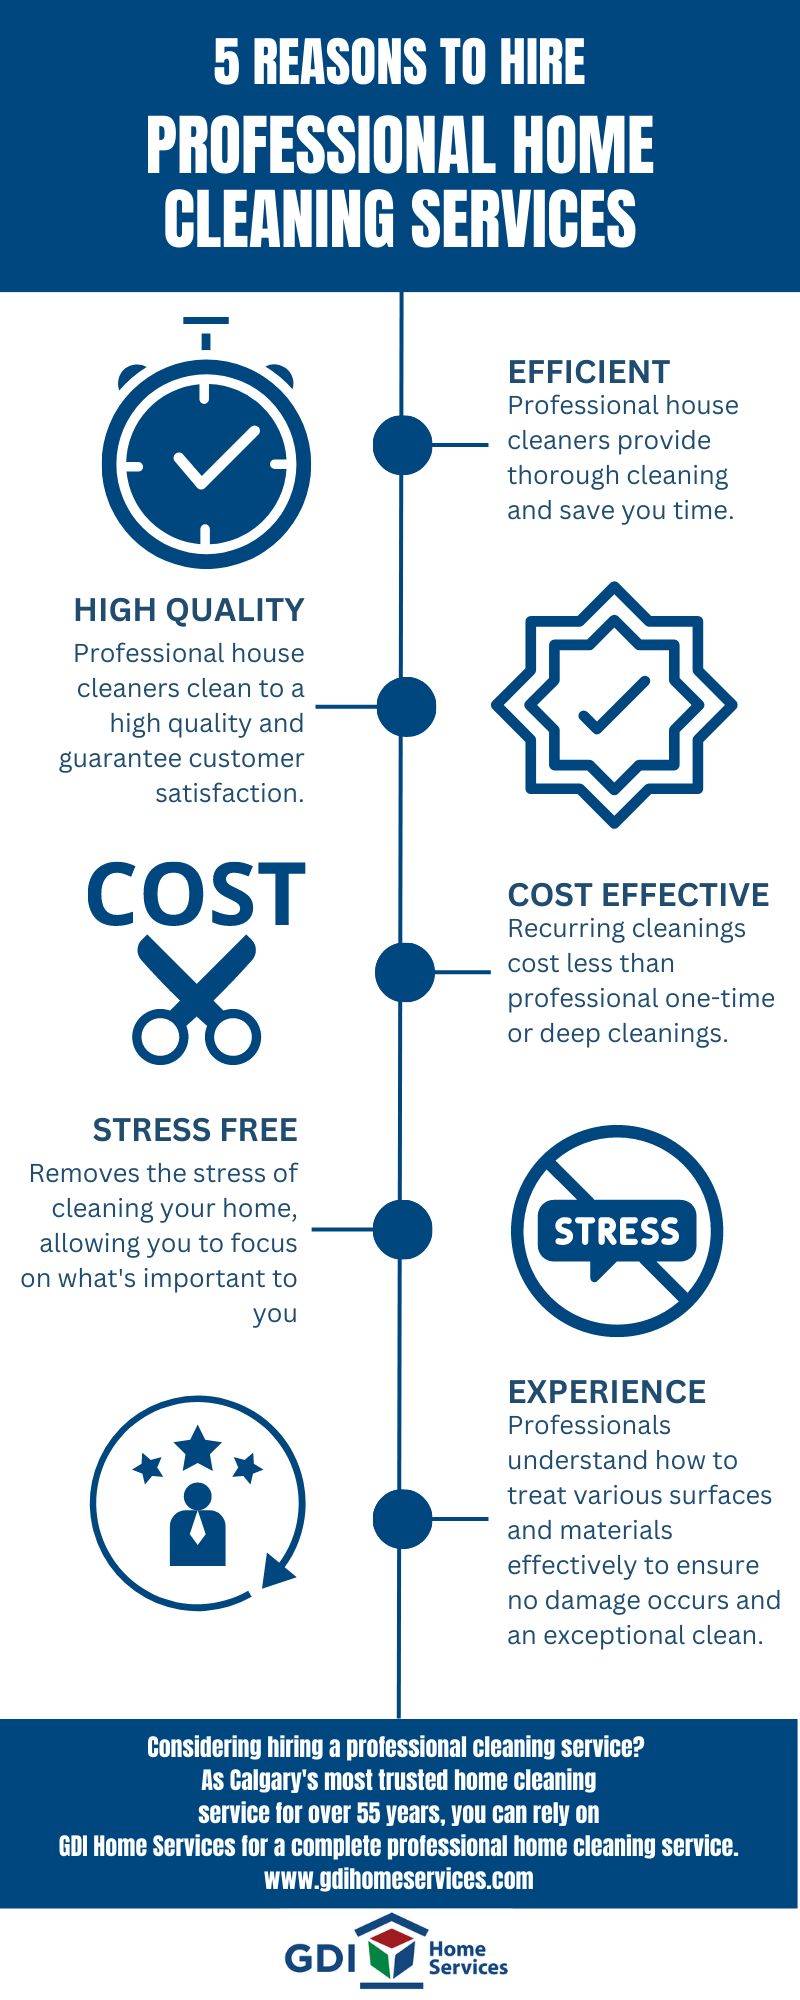 5 Reasons to Hire Professional Home Cleaning Services